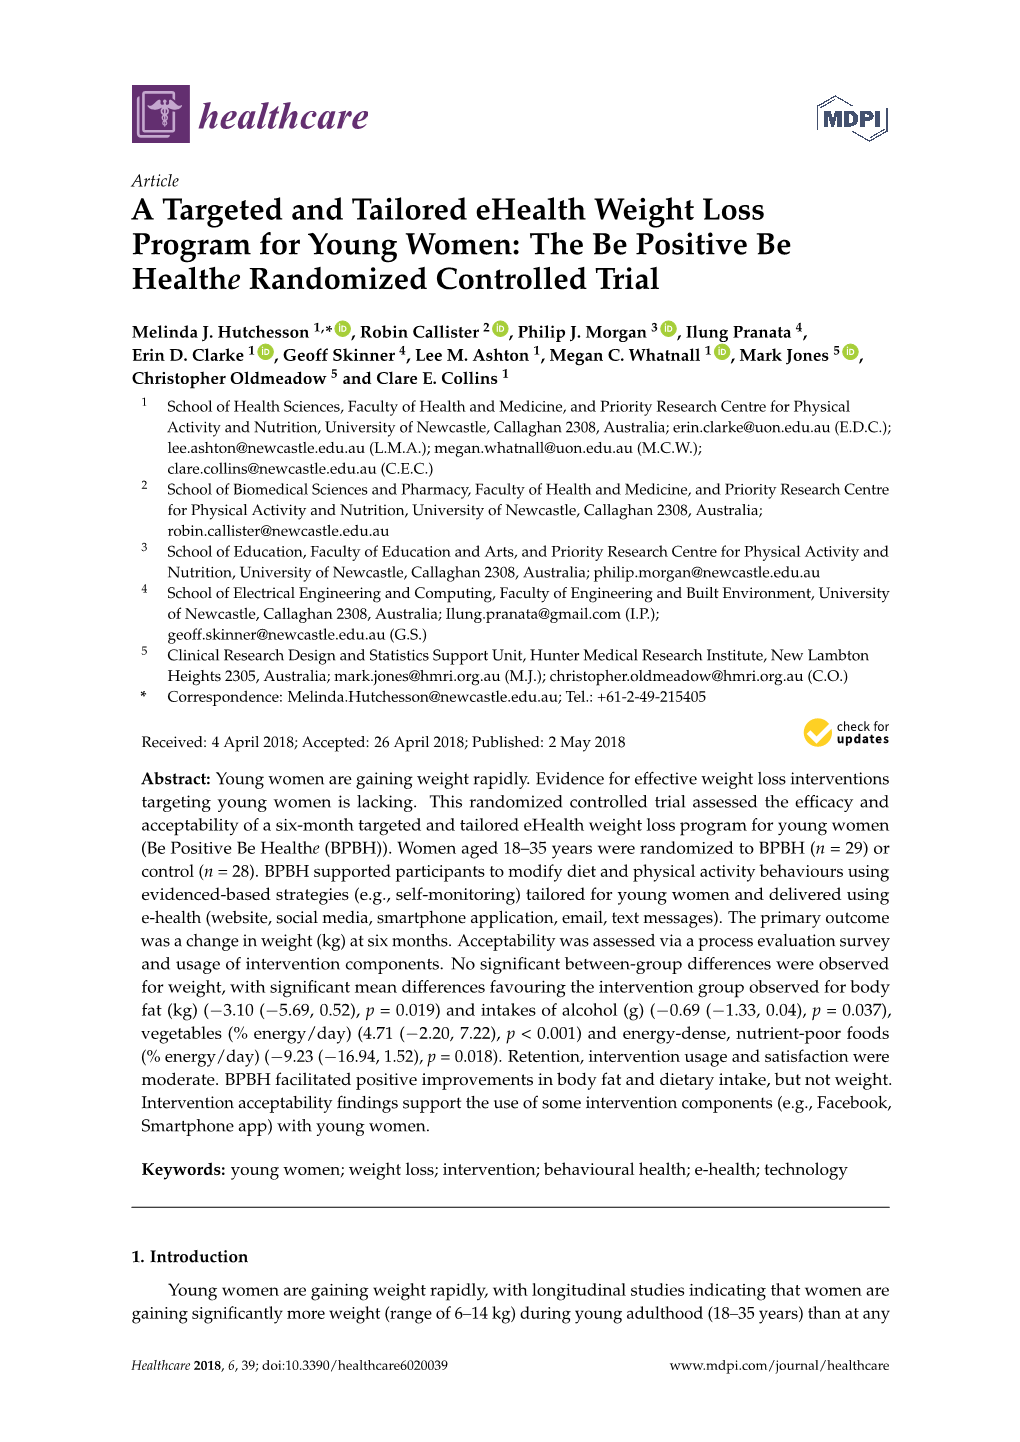 A Targeted and Tailored Ehealth Weight Loss Program for Young Women: the Be Positive Be Healthe Randomized Controlled Trial